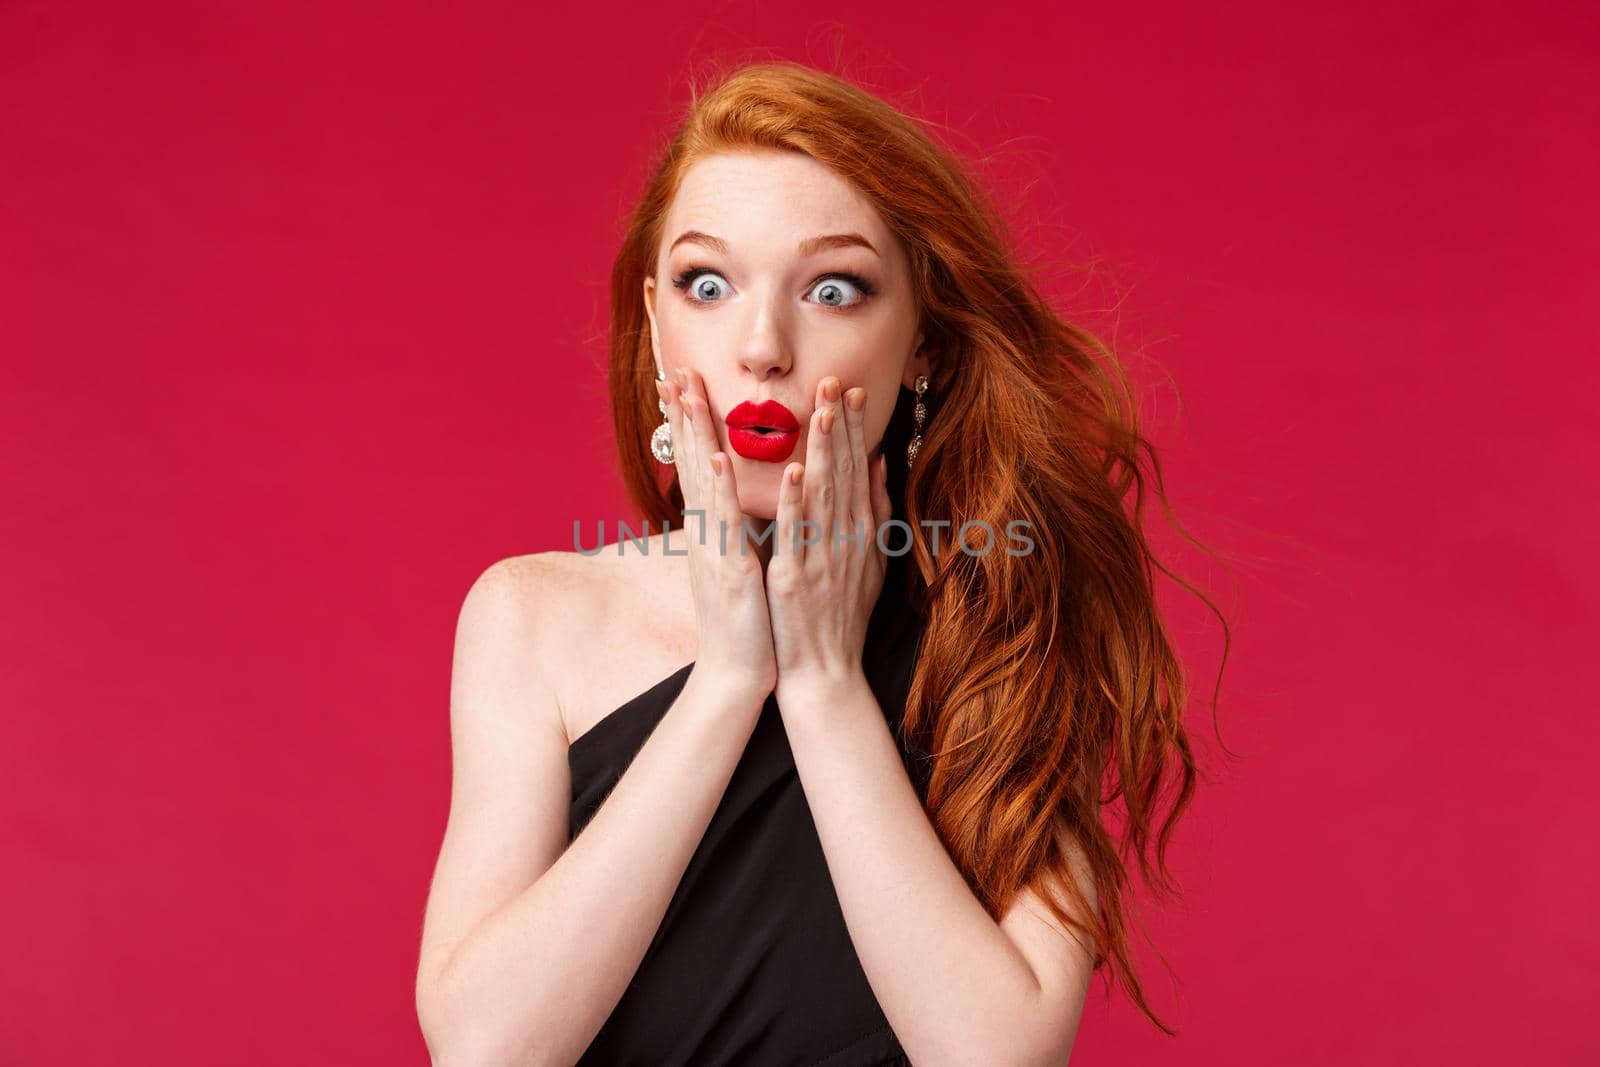 Makeup, beauty and women concept. Close-up portrait of amazed and impressed young redhead beautiful girl seeing something awesome and expensive, want it, stare astonished, standing red background.